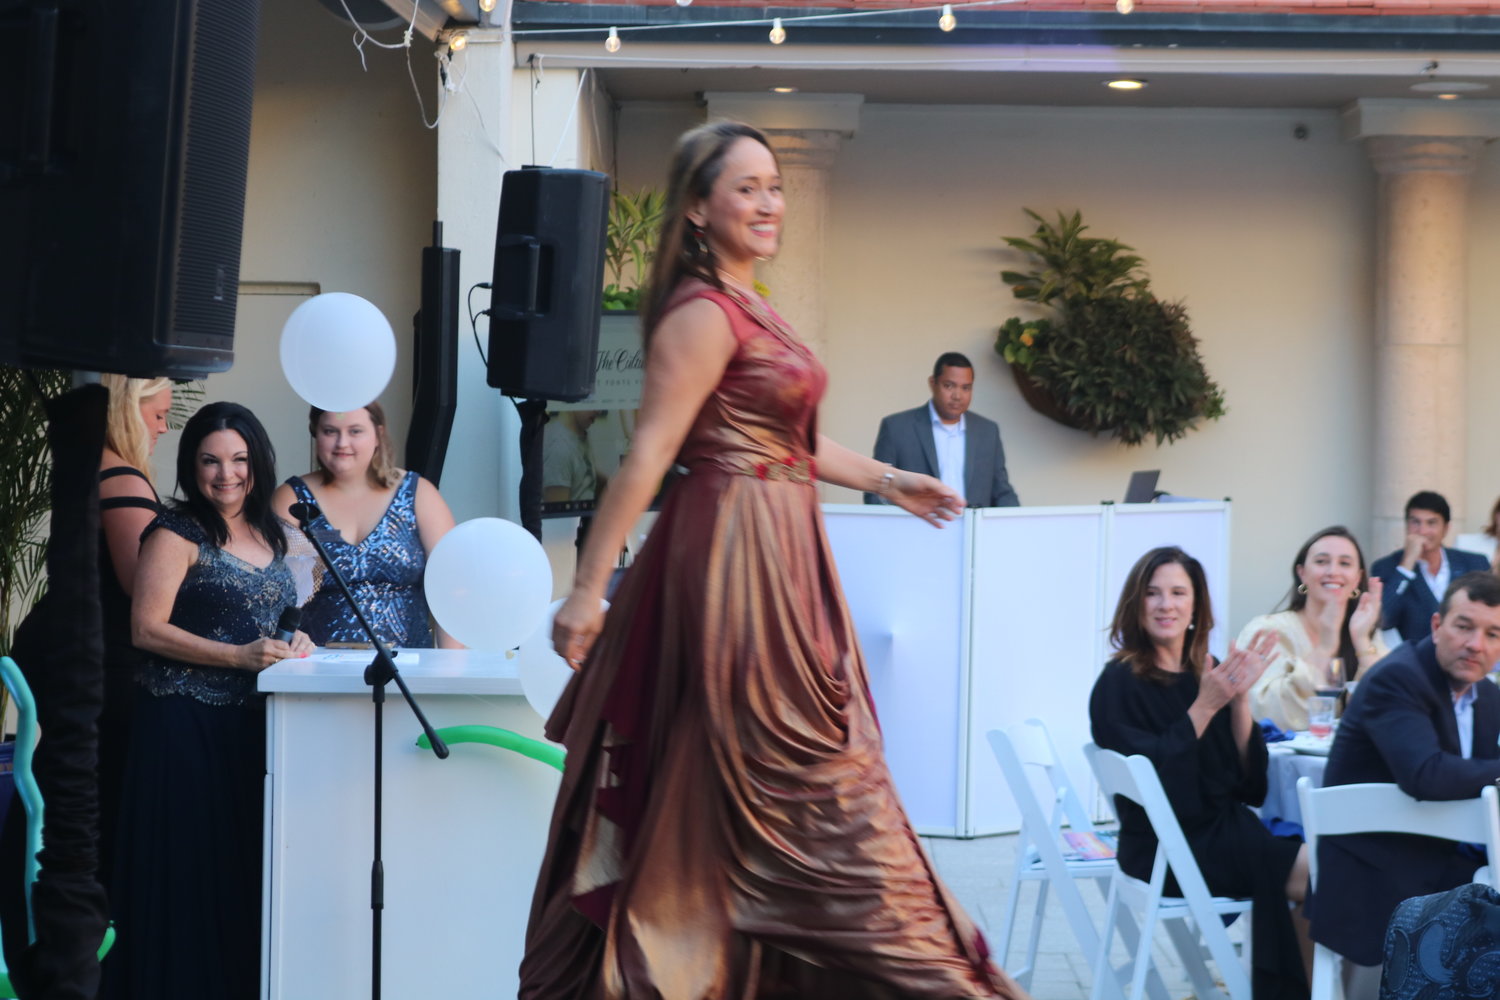 A fashion show, presented in cooperation with fashion designer Dr. Arun Gulani, was one of the highlights of the Beaches, A Celebration of the Arts event.